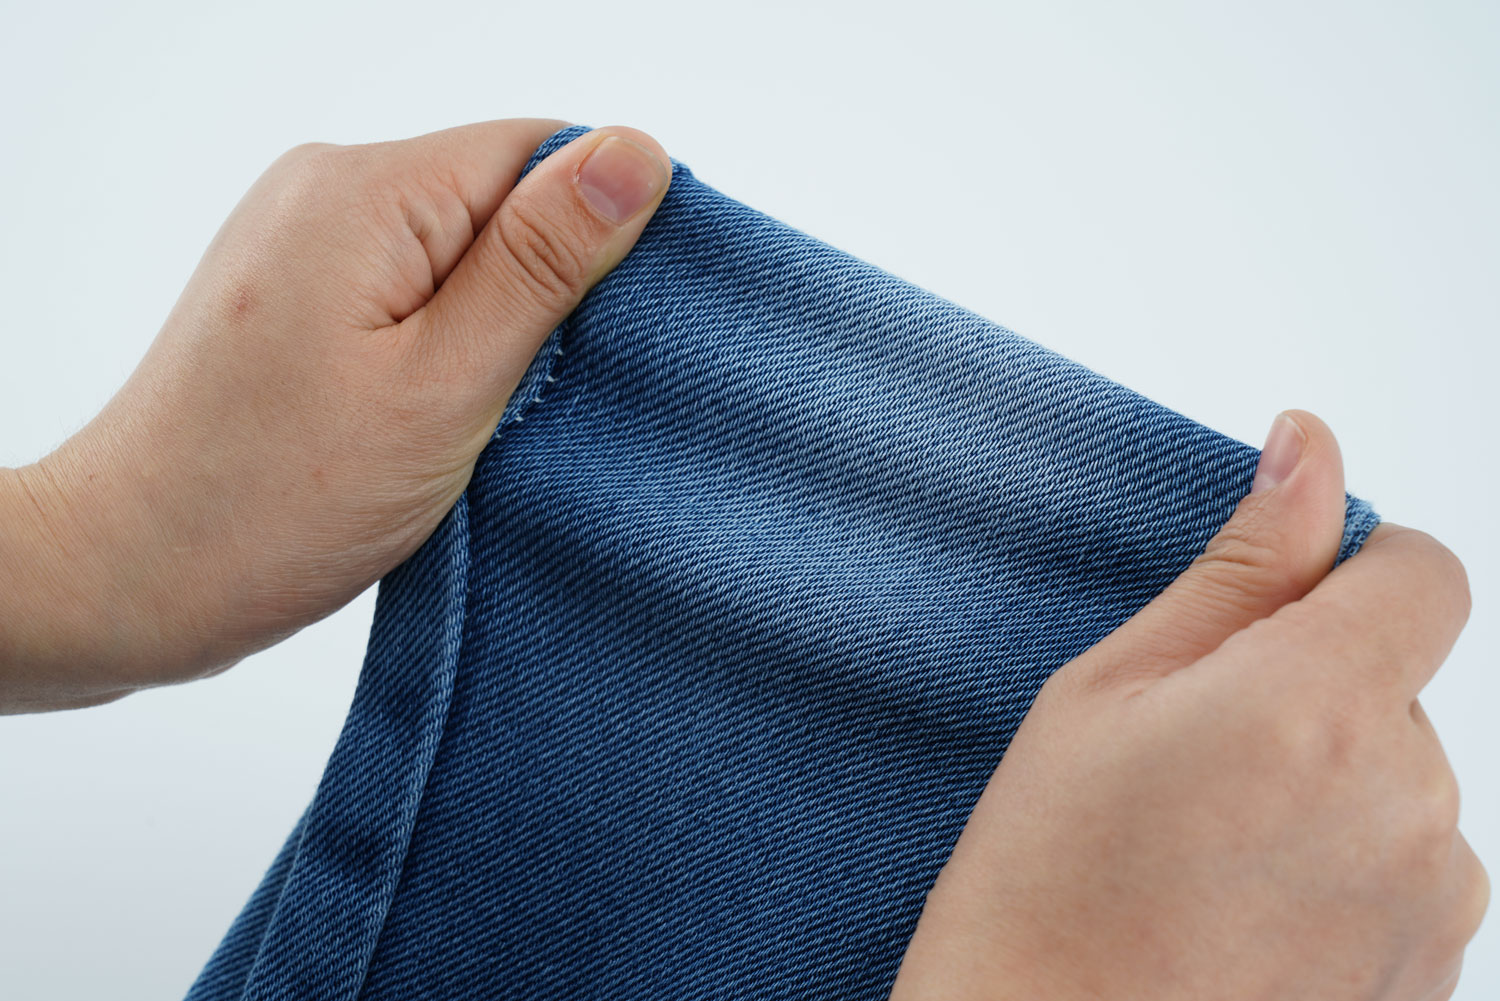 How to Find a Good Stretchable Denim Company? 2